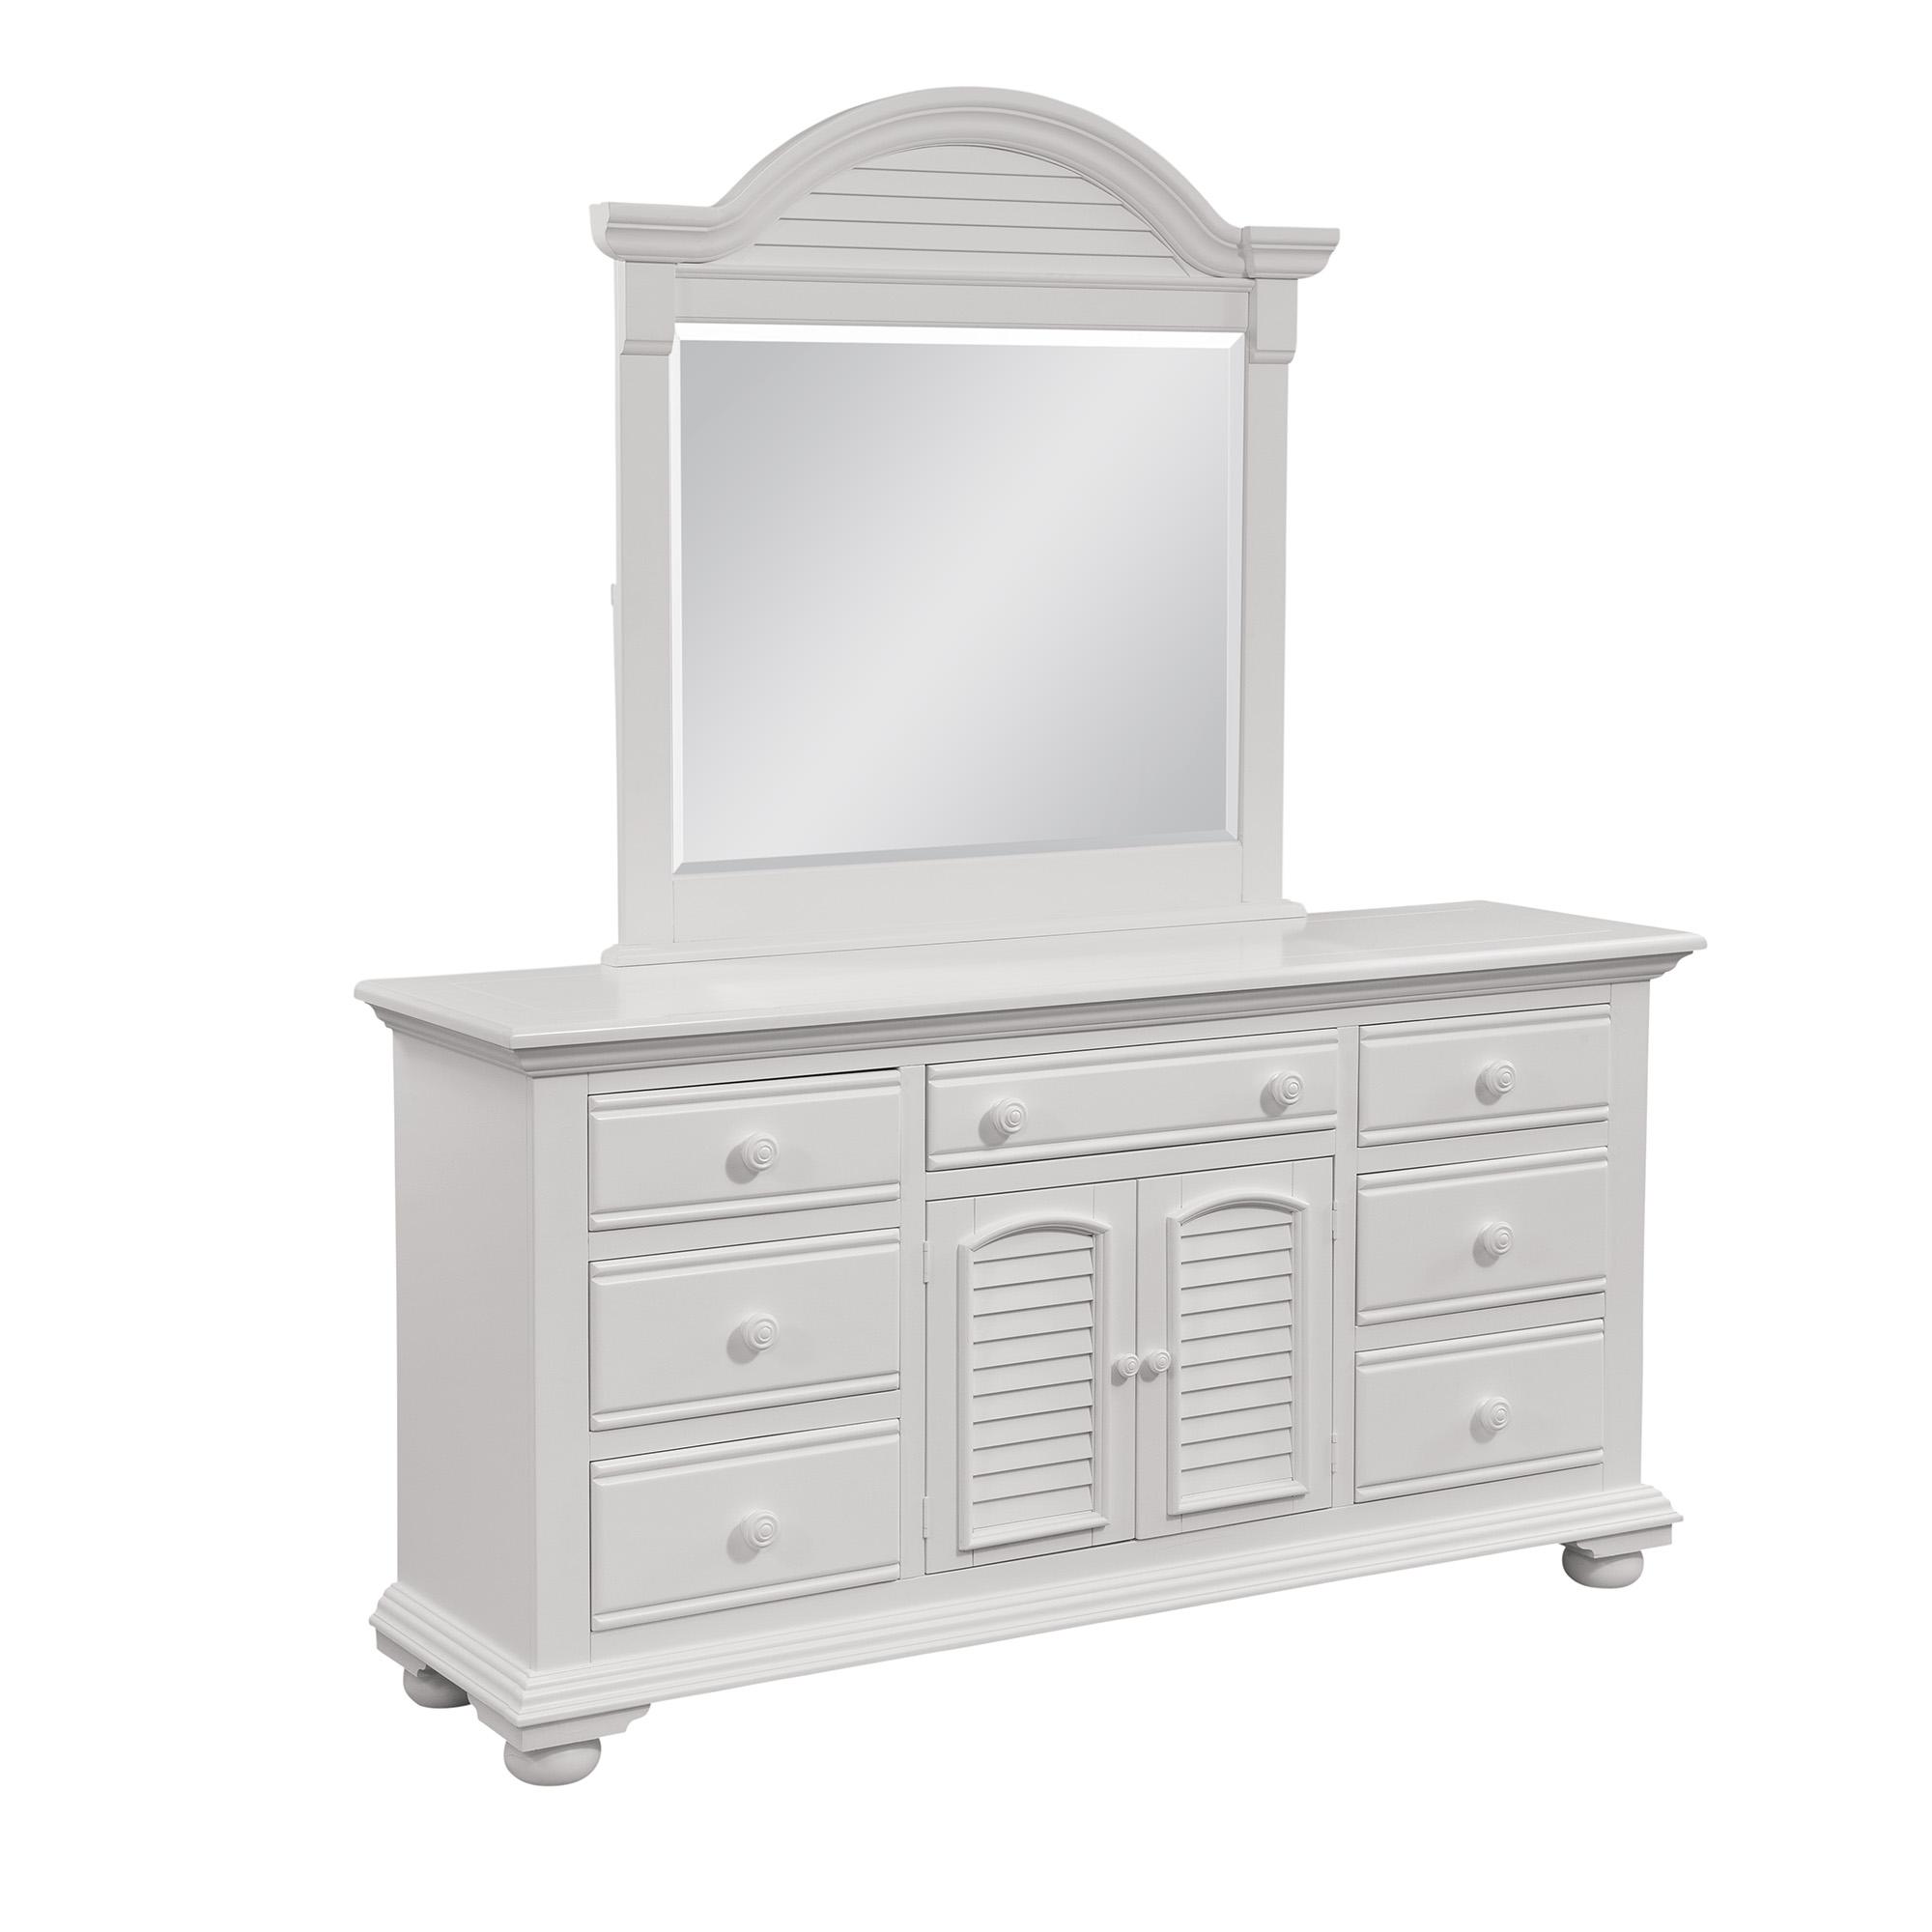 American Woodcrafters COTTAGE 6510-TDDM Dresser With Mirror